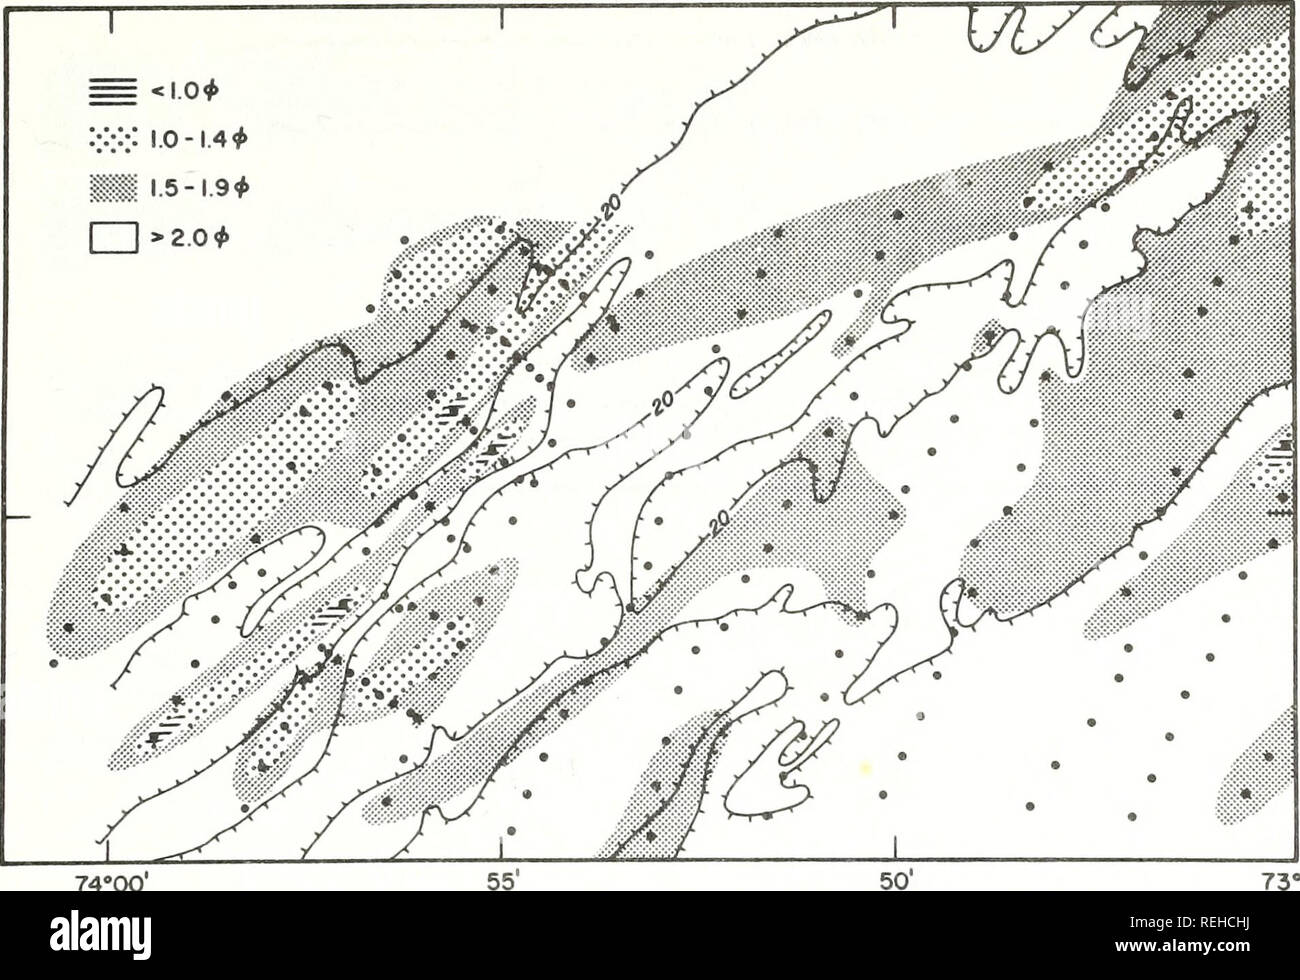 . Collected reprints / Atlantic Oceanographic and Meteorological Laboratories [and] Pacific Oceanographic Laboratories. Oceanography Periodicals.. New York-New Jersey shelf 73. 39*10 N ^o-- Z3'05' 74°00' 73&quot;45' W Fig. 3. Simplified bathymetry and distribution of grain sizes on a portion of the central New Jersey shelf. Medium to fine sand occurs on ridge crests. Fine to very fine sand occurs on ridge flanks and in troughs. Locally, erosion in troughs has exposed a thin lag of coarse, shelly, pebbly sand over lagoonal clay. (Reprinted from Stubblefield et al. 1974 by permission of the Jour Stock Photo